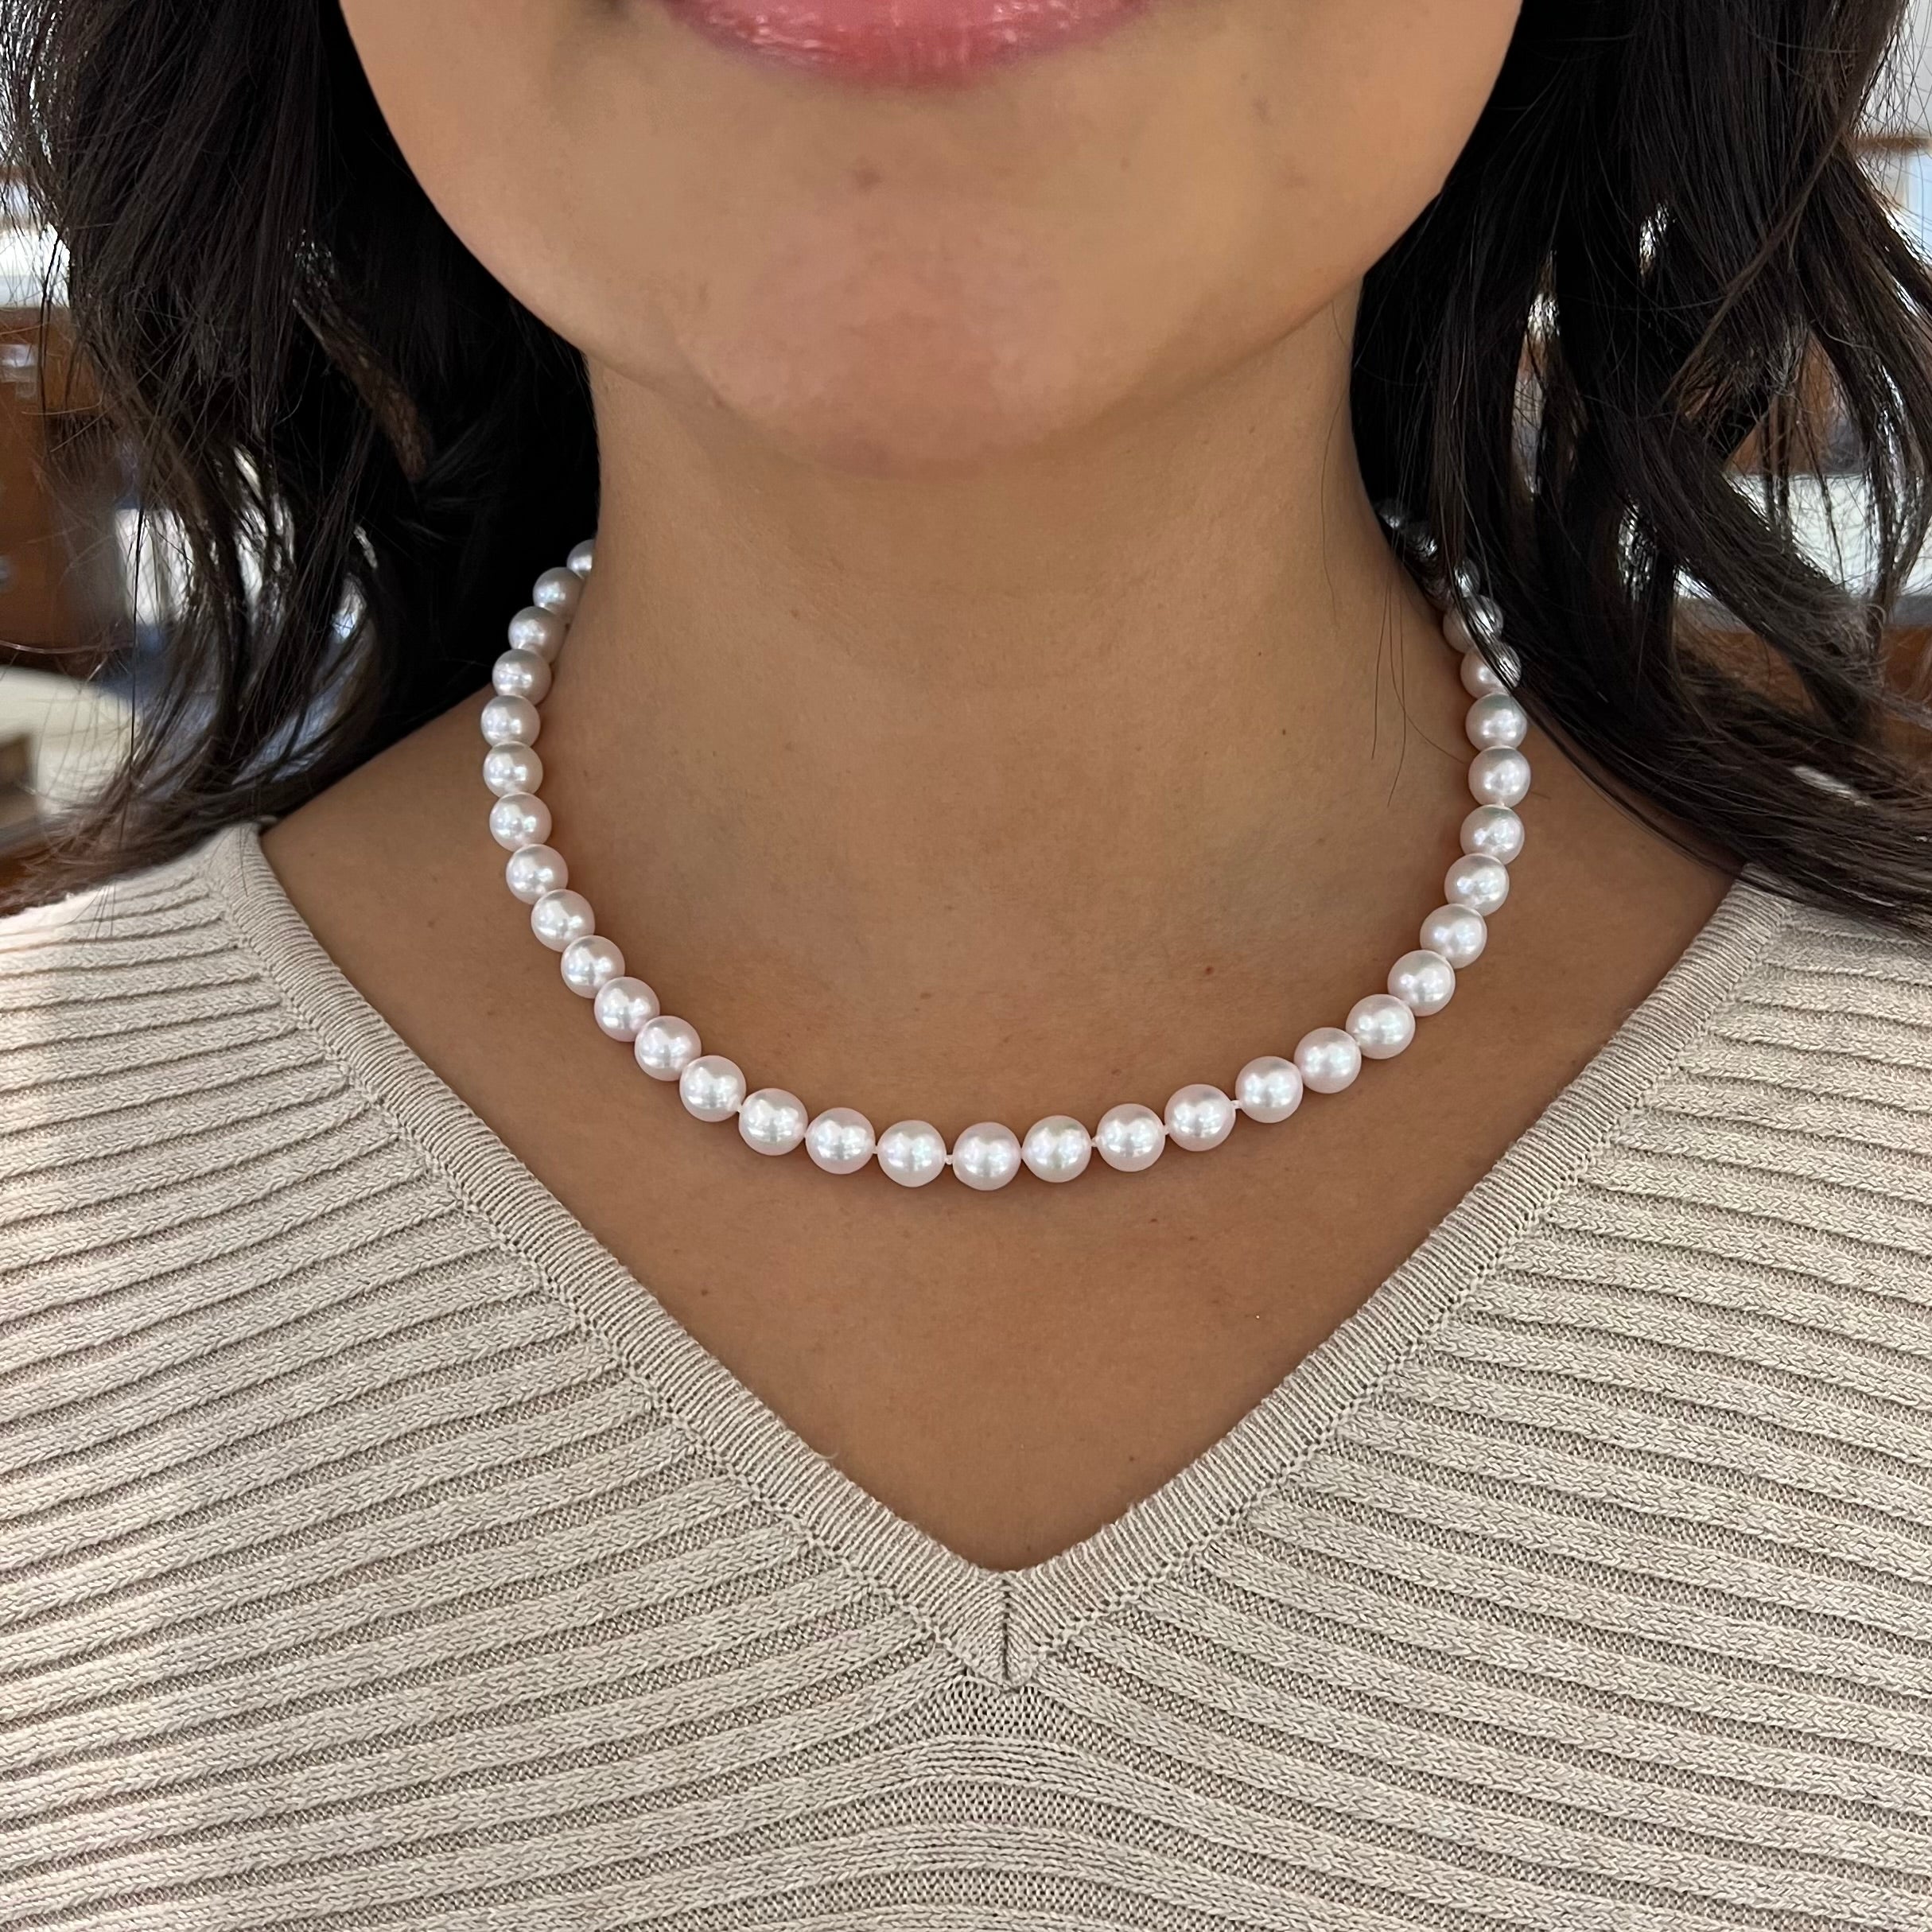 17-19" Akoya White Pearl Strand with White Gold Clasp - 8.5-9.5mm